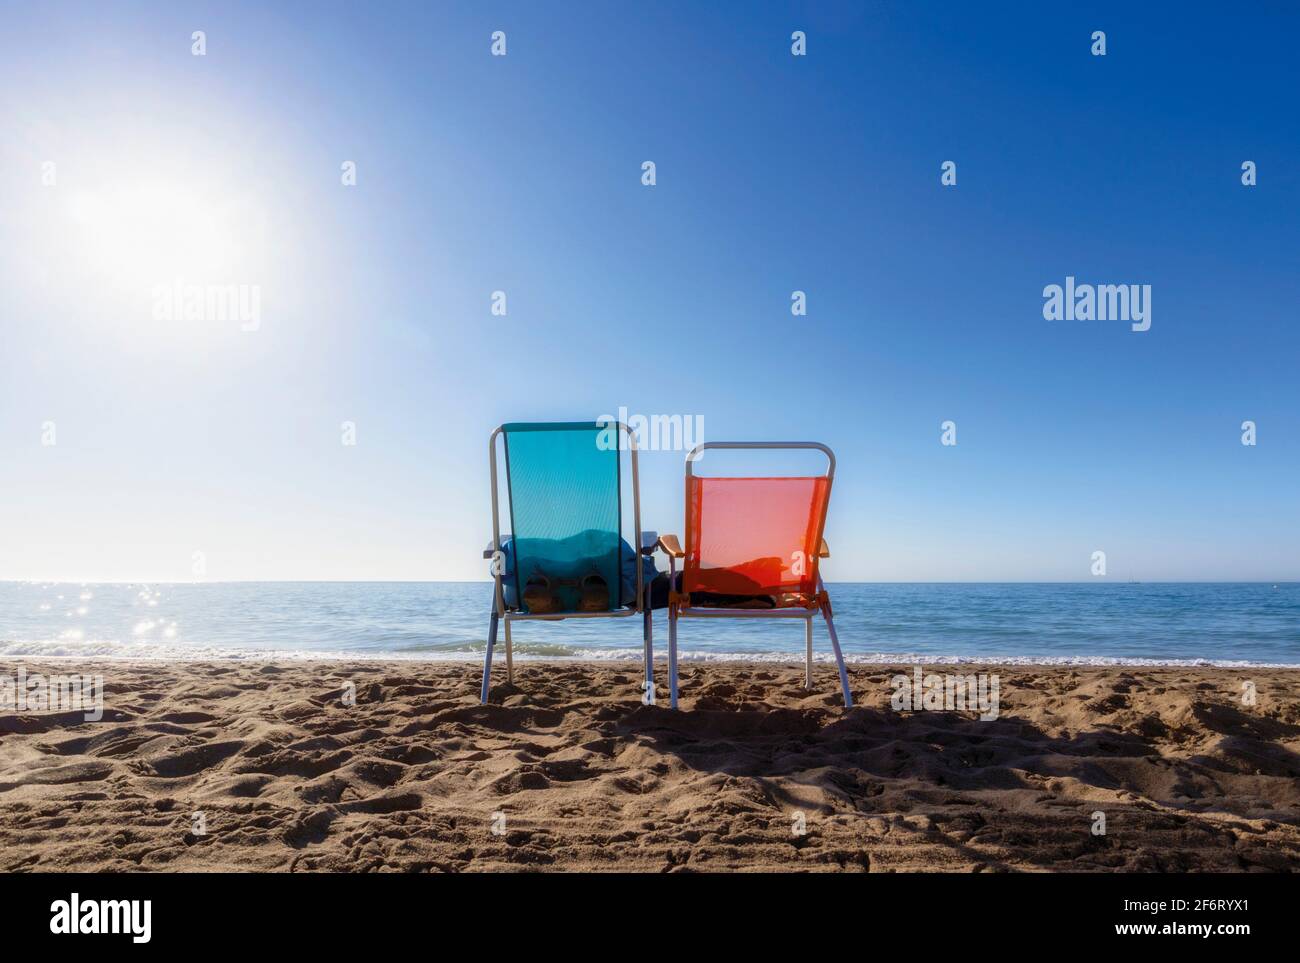 Torremolinos, Costa del Sol, Malaga Province, Andalusia, southern Spain. Summer. Early morning on Playamar beach. Two empty portable chairs. Stock Photo